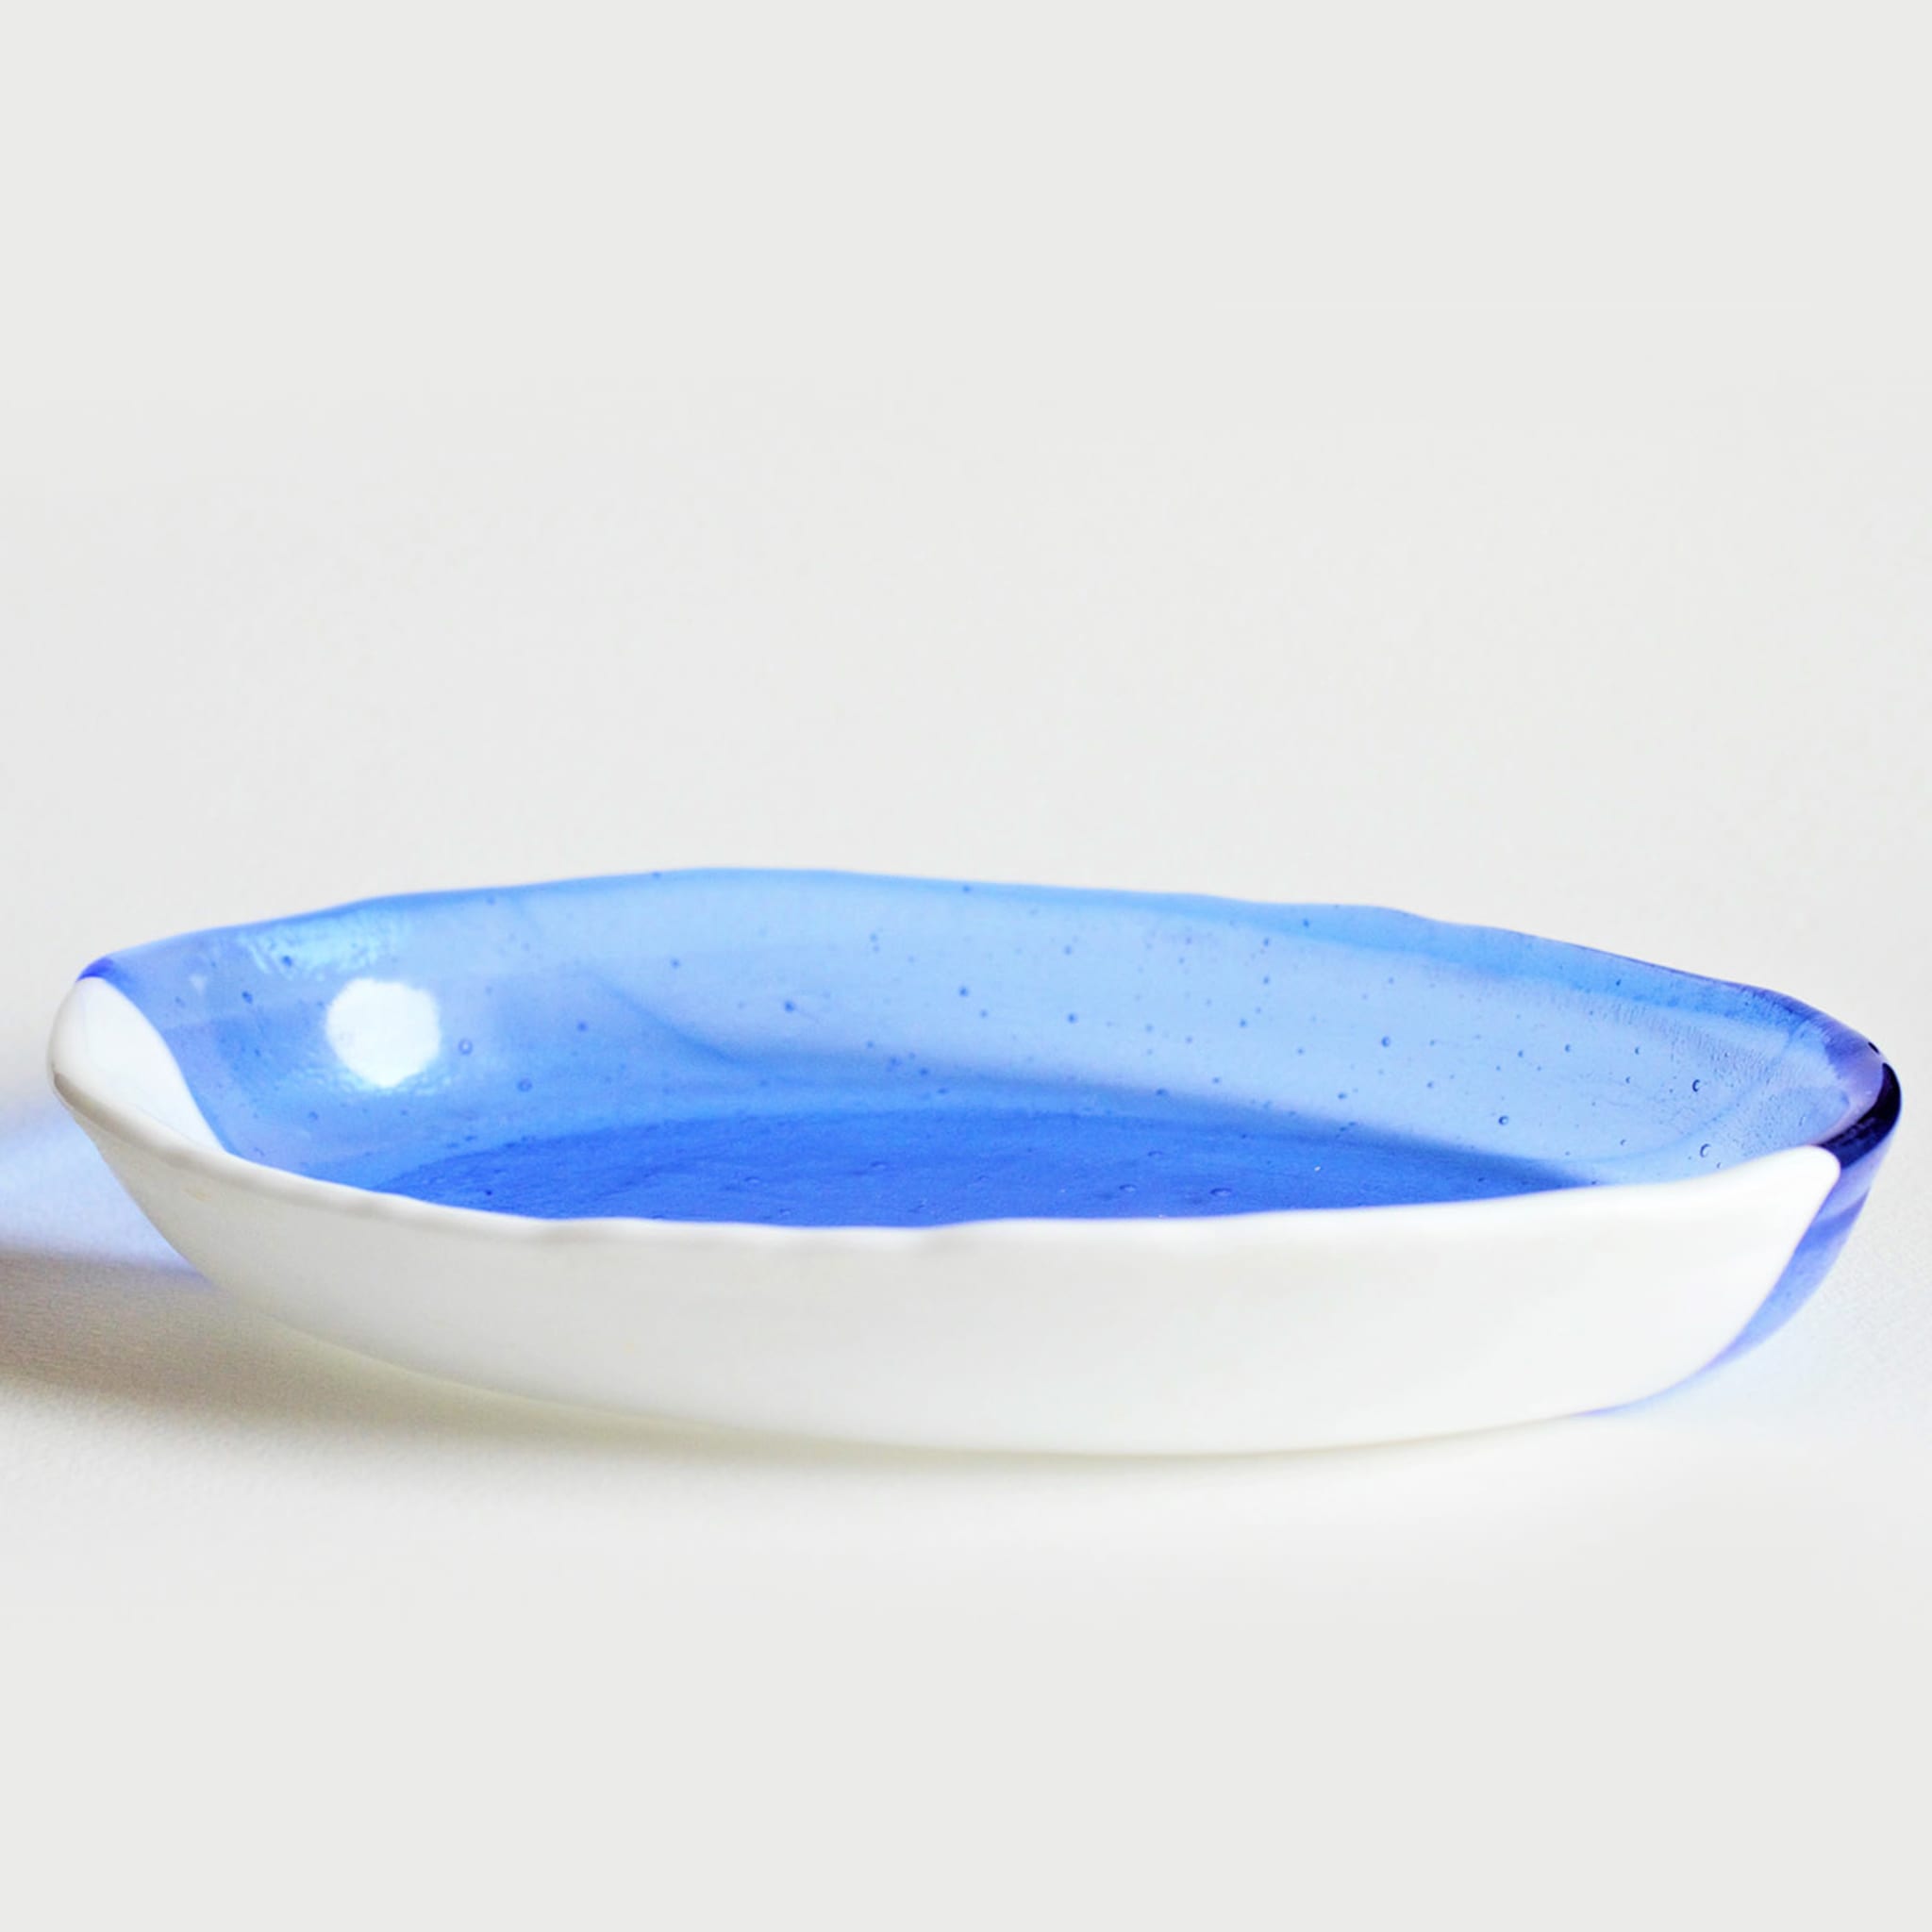 White and Blue Glass Serving Platter  - Alternative view 1